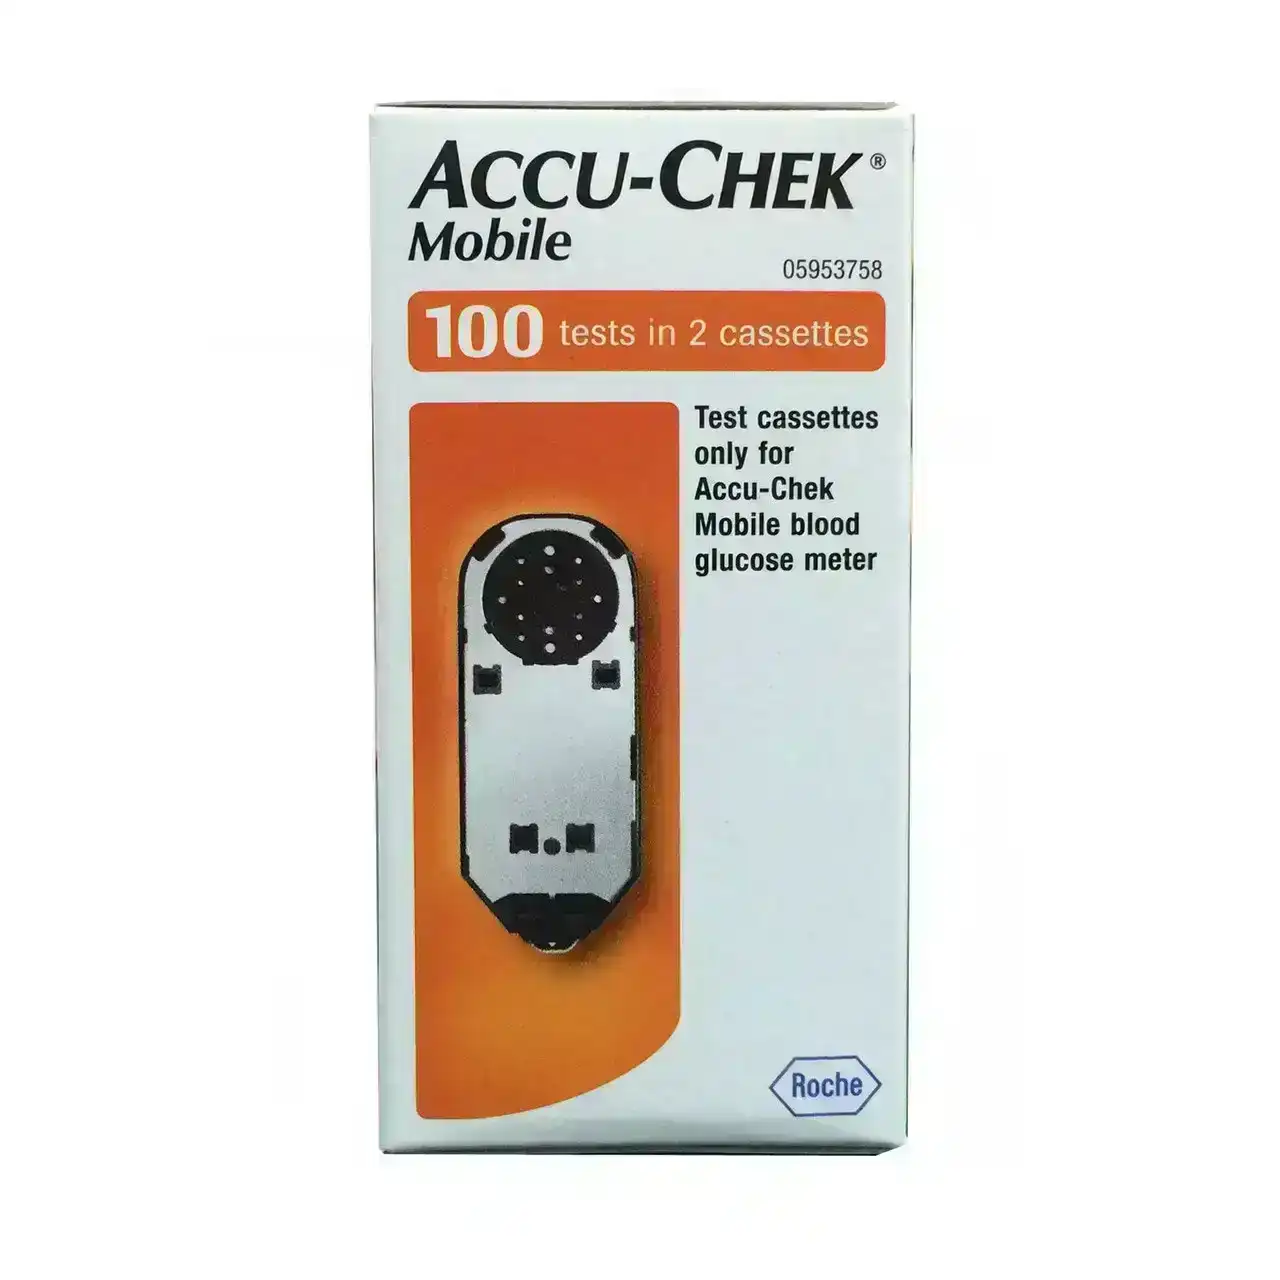 Accuchek Mobile 100 Blood Glucose Tests in 2 Cassettes